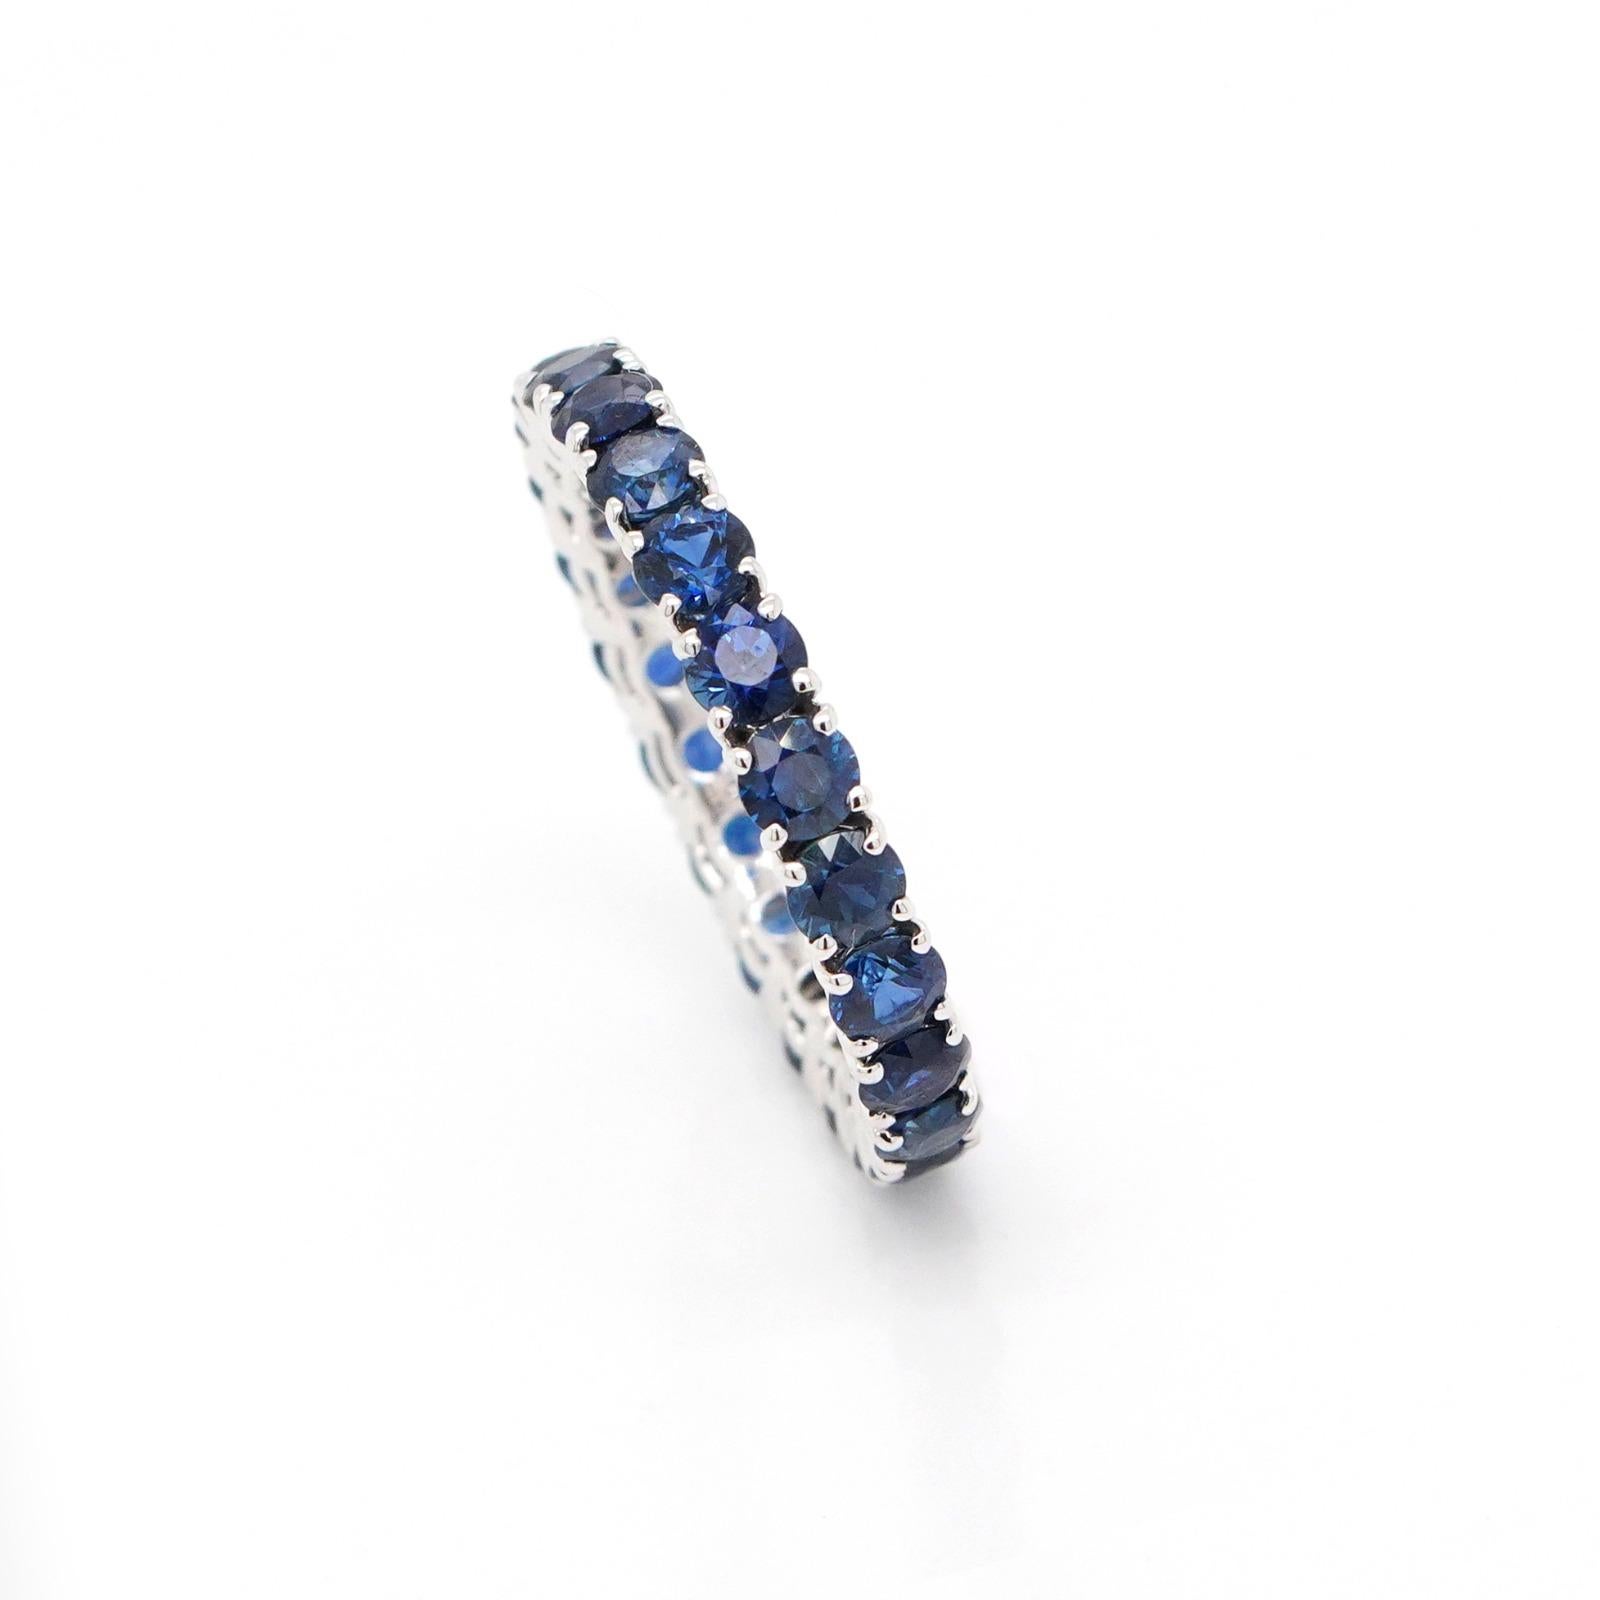 18K white gold with natural blue sapphire 3.01 carat 2.46 grams
